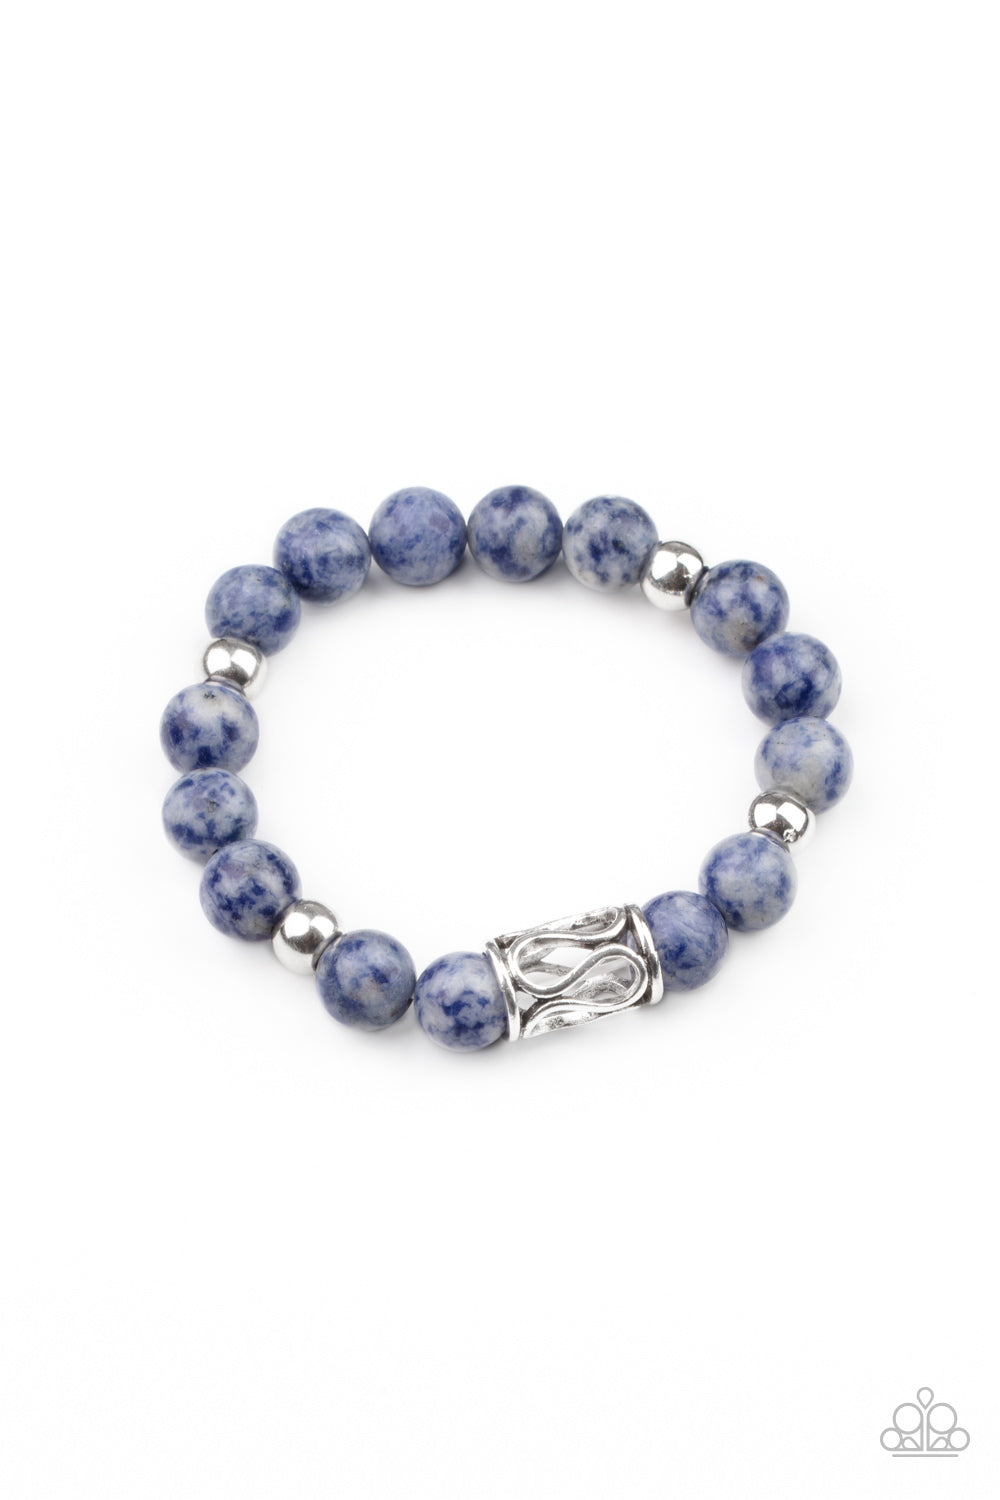 Soothes The Soul Blue Urban Bracelet - Paparazzi Accessories.  Infused with an ornate silver centerpiece, an earthy collection of silver and lapis lazuli beads are threaded along a stretchy band around the wrist for a seasonal flair.  ﻿﻿﻿All Paparazzi Accessories are lead free and nickel free!  Sold as one individual bracelet.